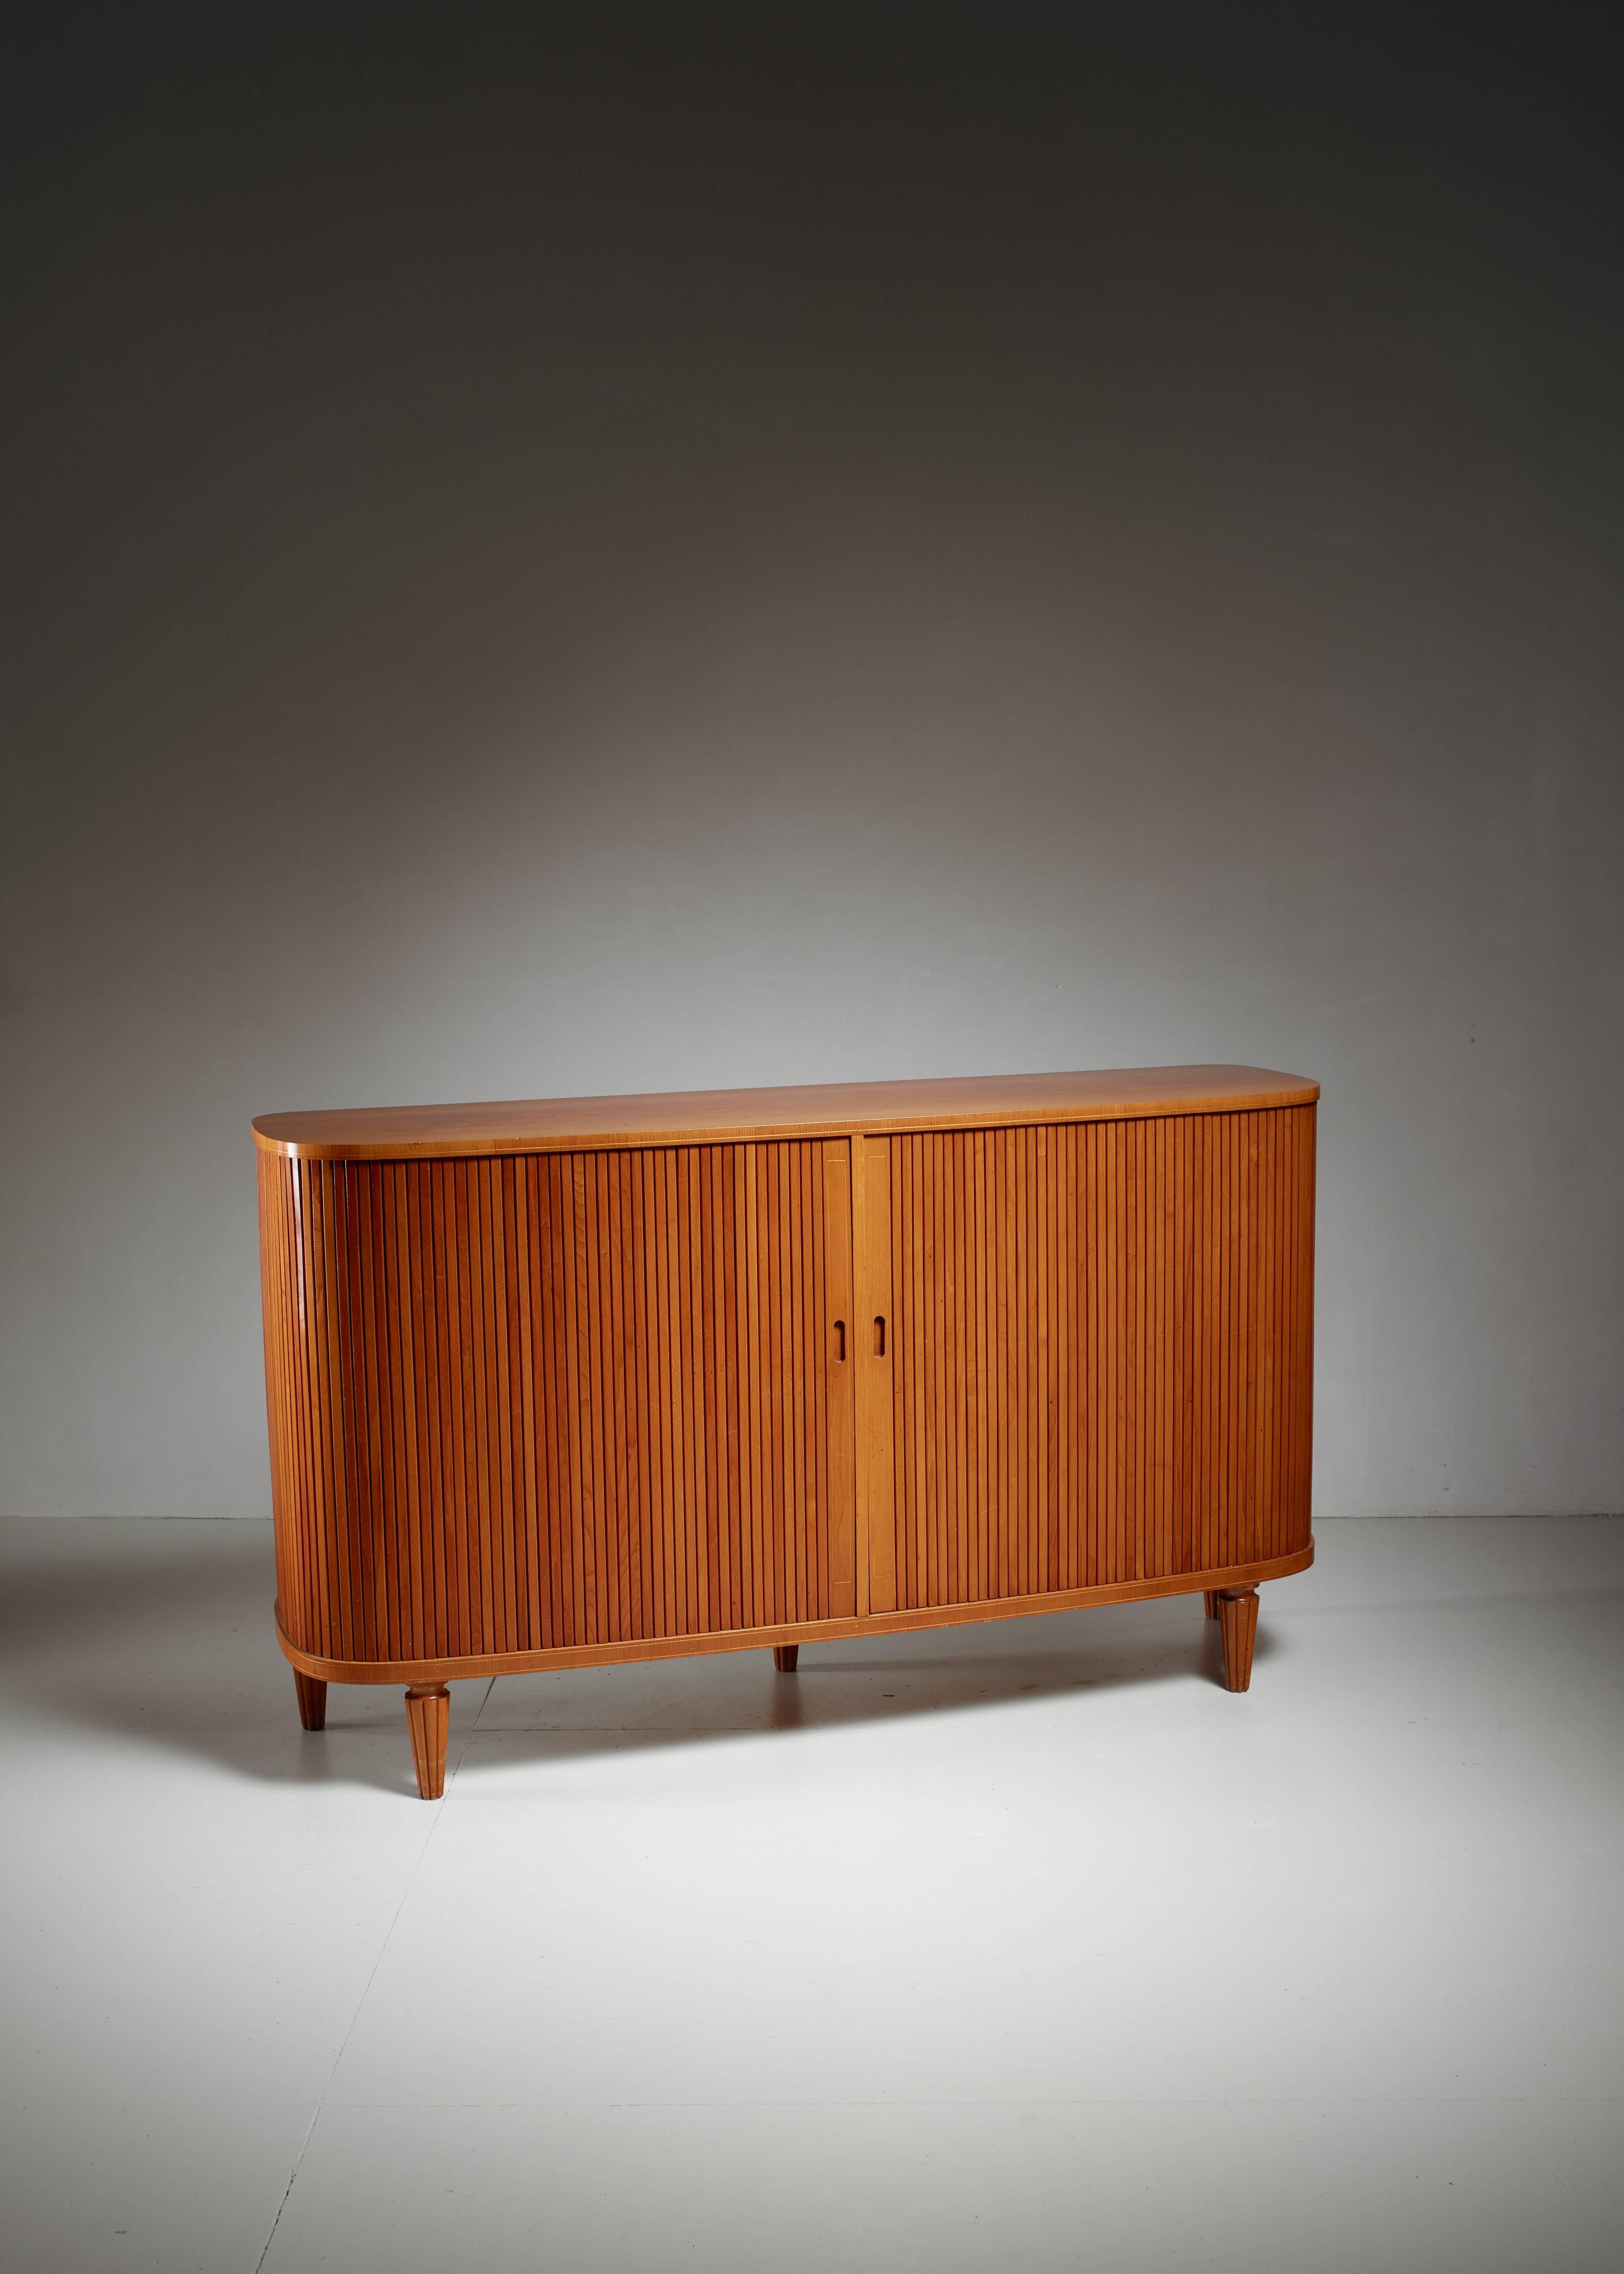 An elegant Swedish sideboard made of elm, with two tambour doors, standing on five sculpted, tapering legs. Inside the sideboard has shelves and five small document drawers. The edges underneath and above the door have been subtly decorated with